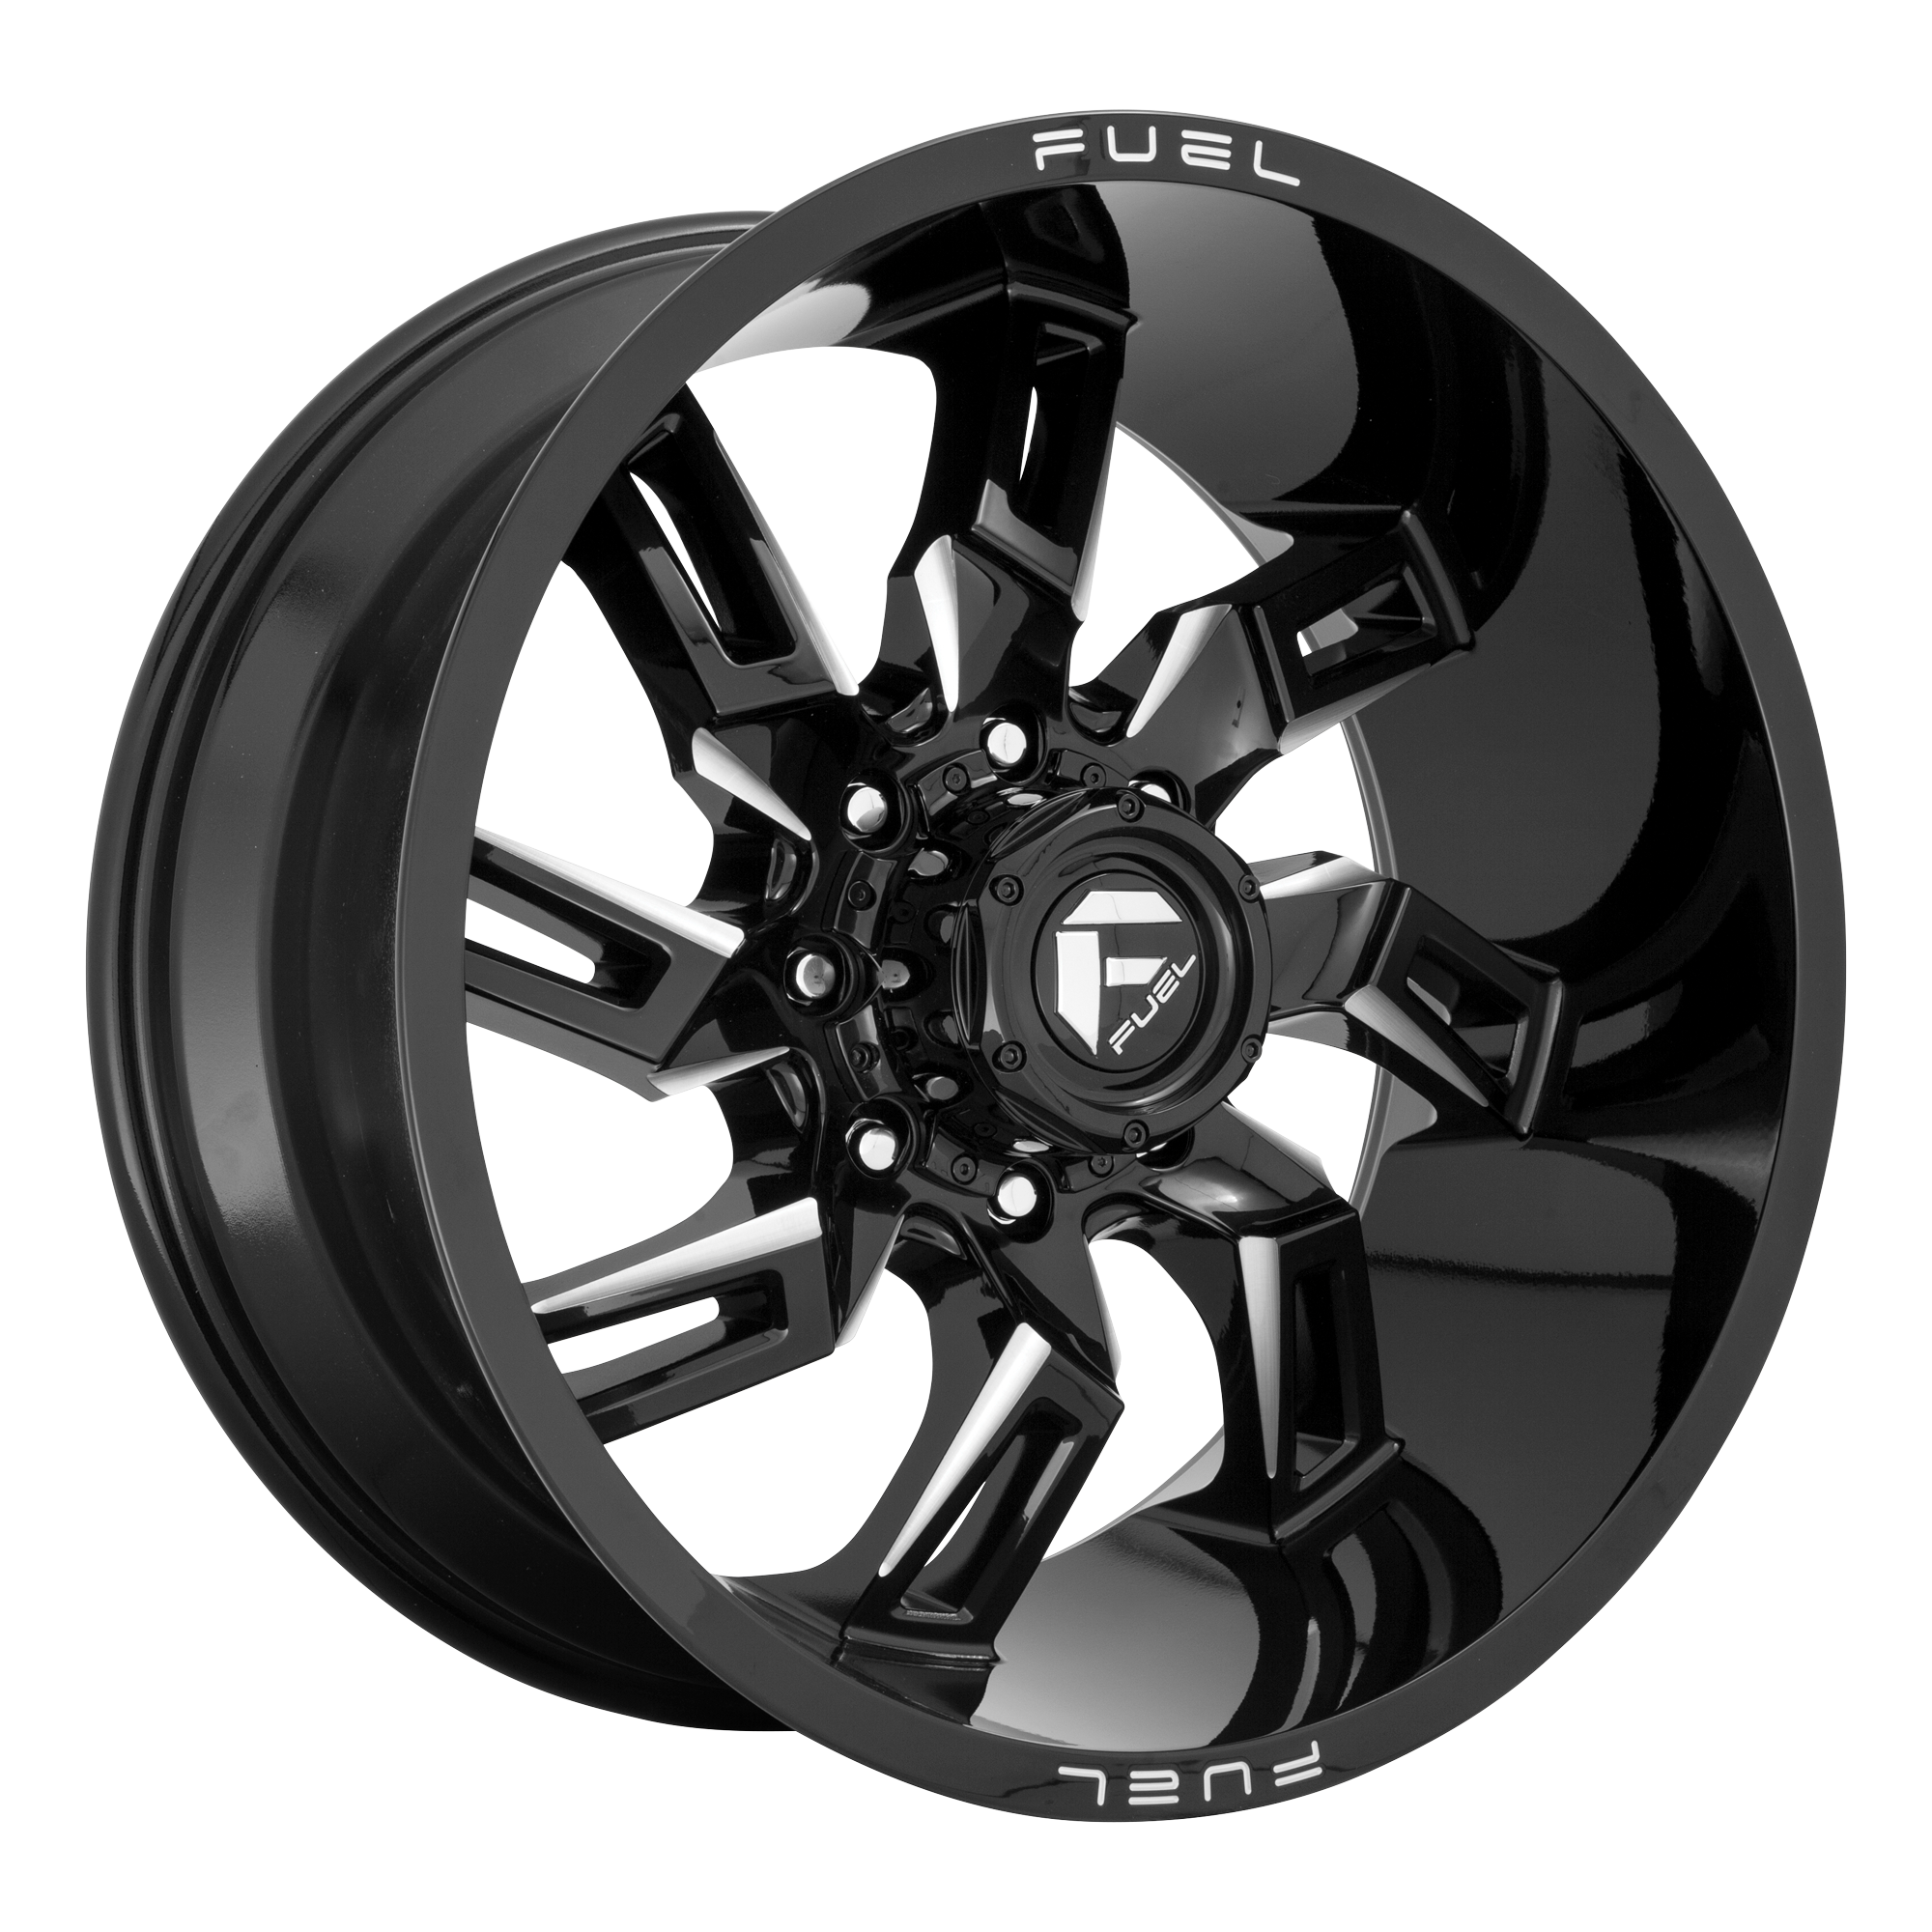 LOCKDOWN 20x9 5x139.70 GLOSS BLACK MILLED (1 mm) - Tires and Engine Performance